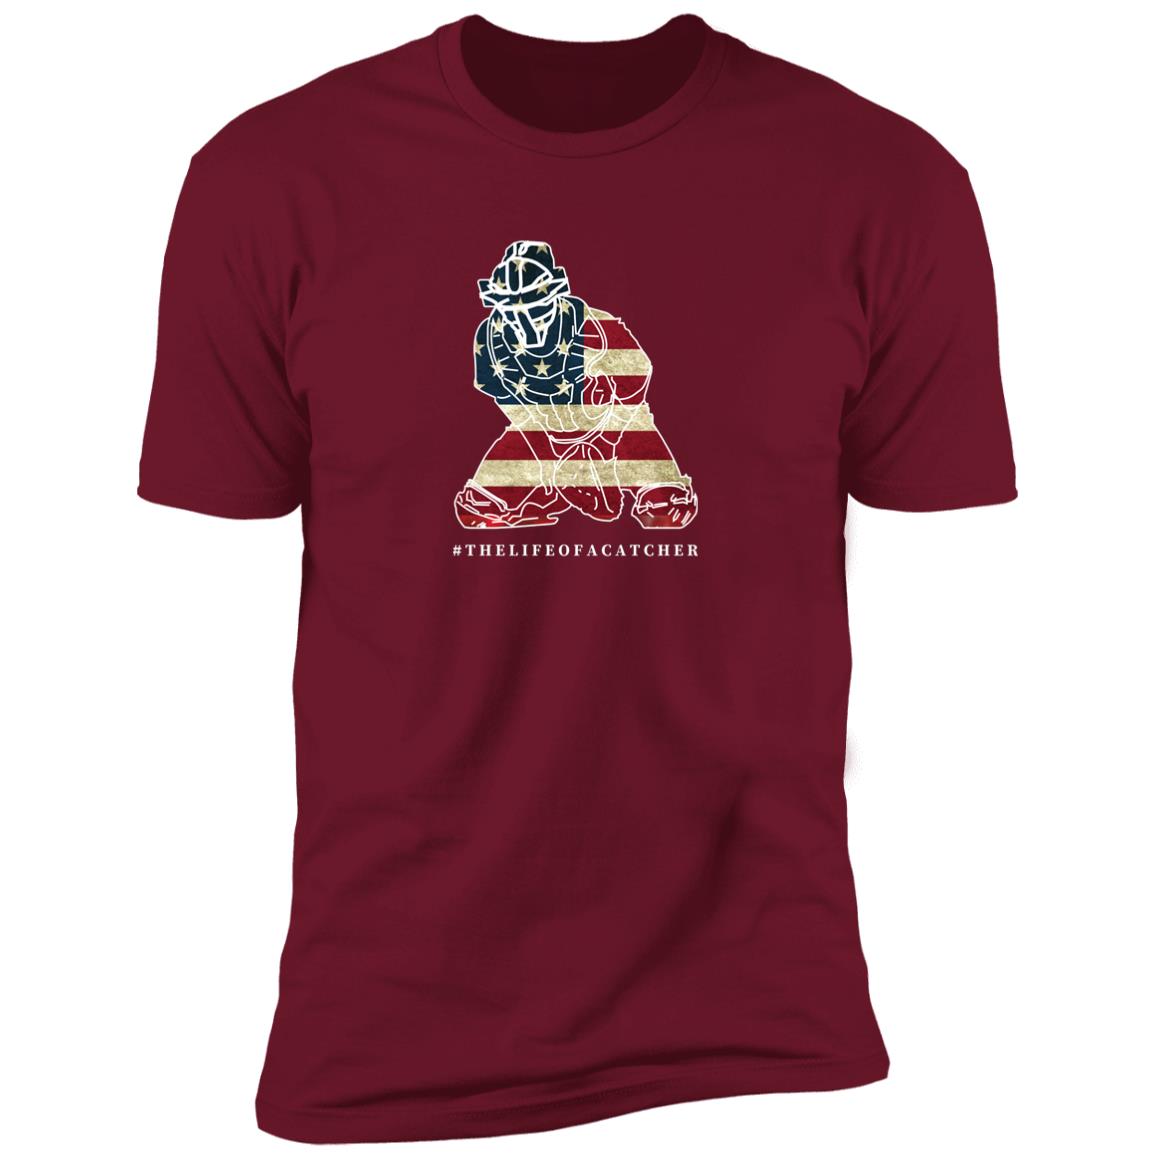 The-Catching-Guy-Flag-tee-catcher-Burgundy